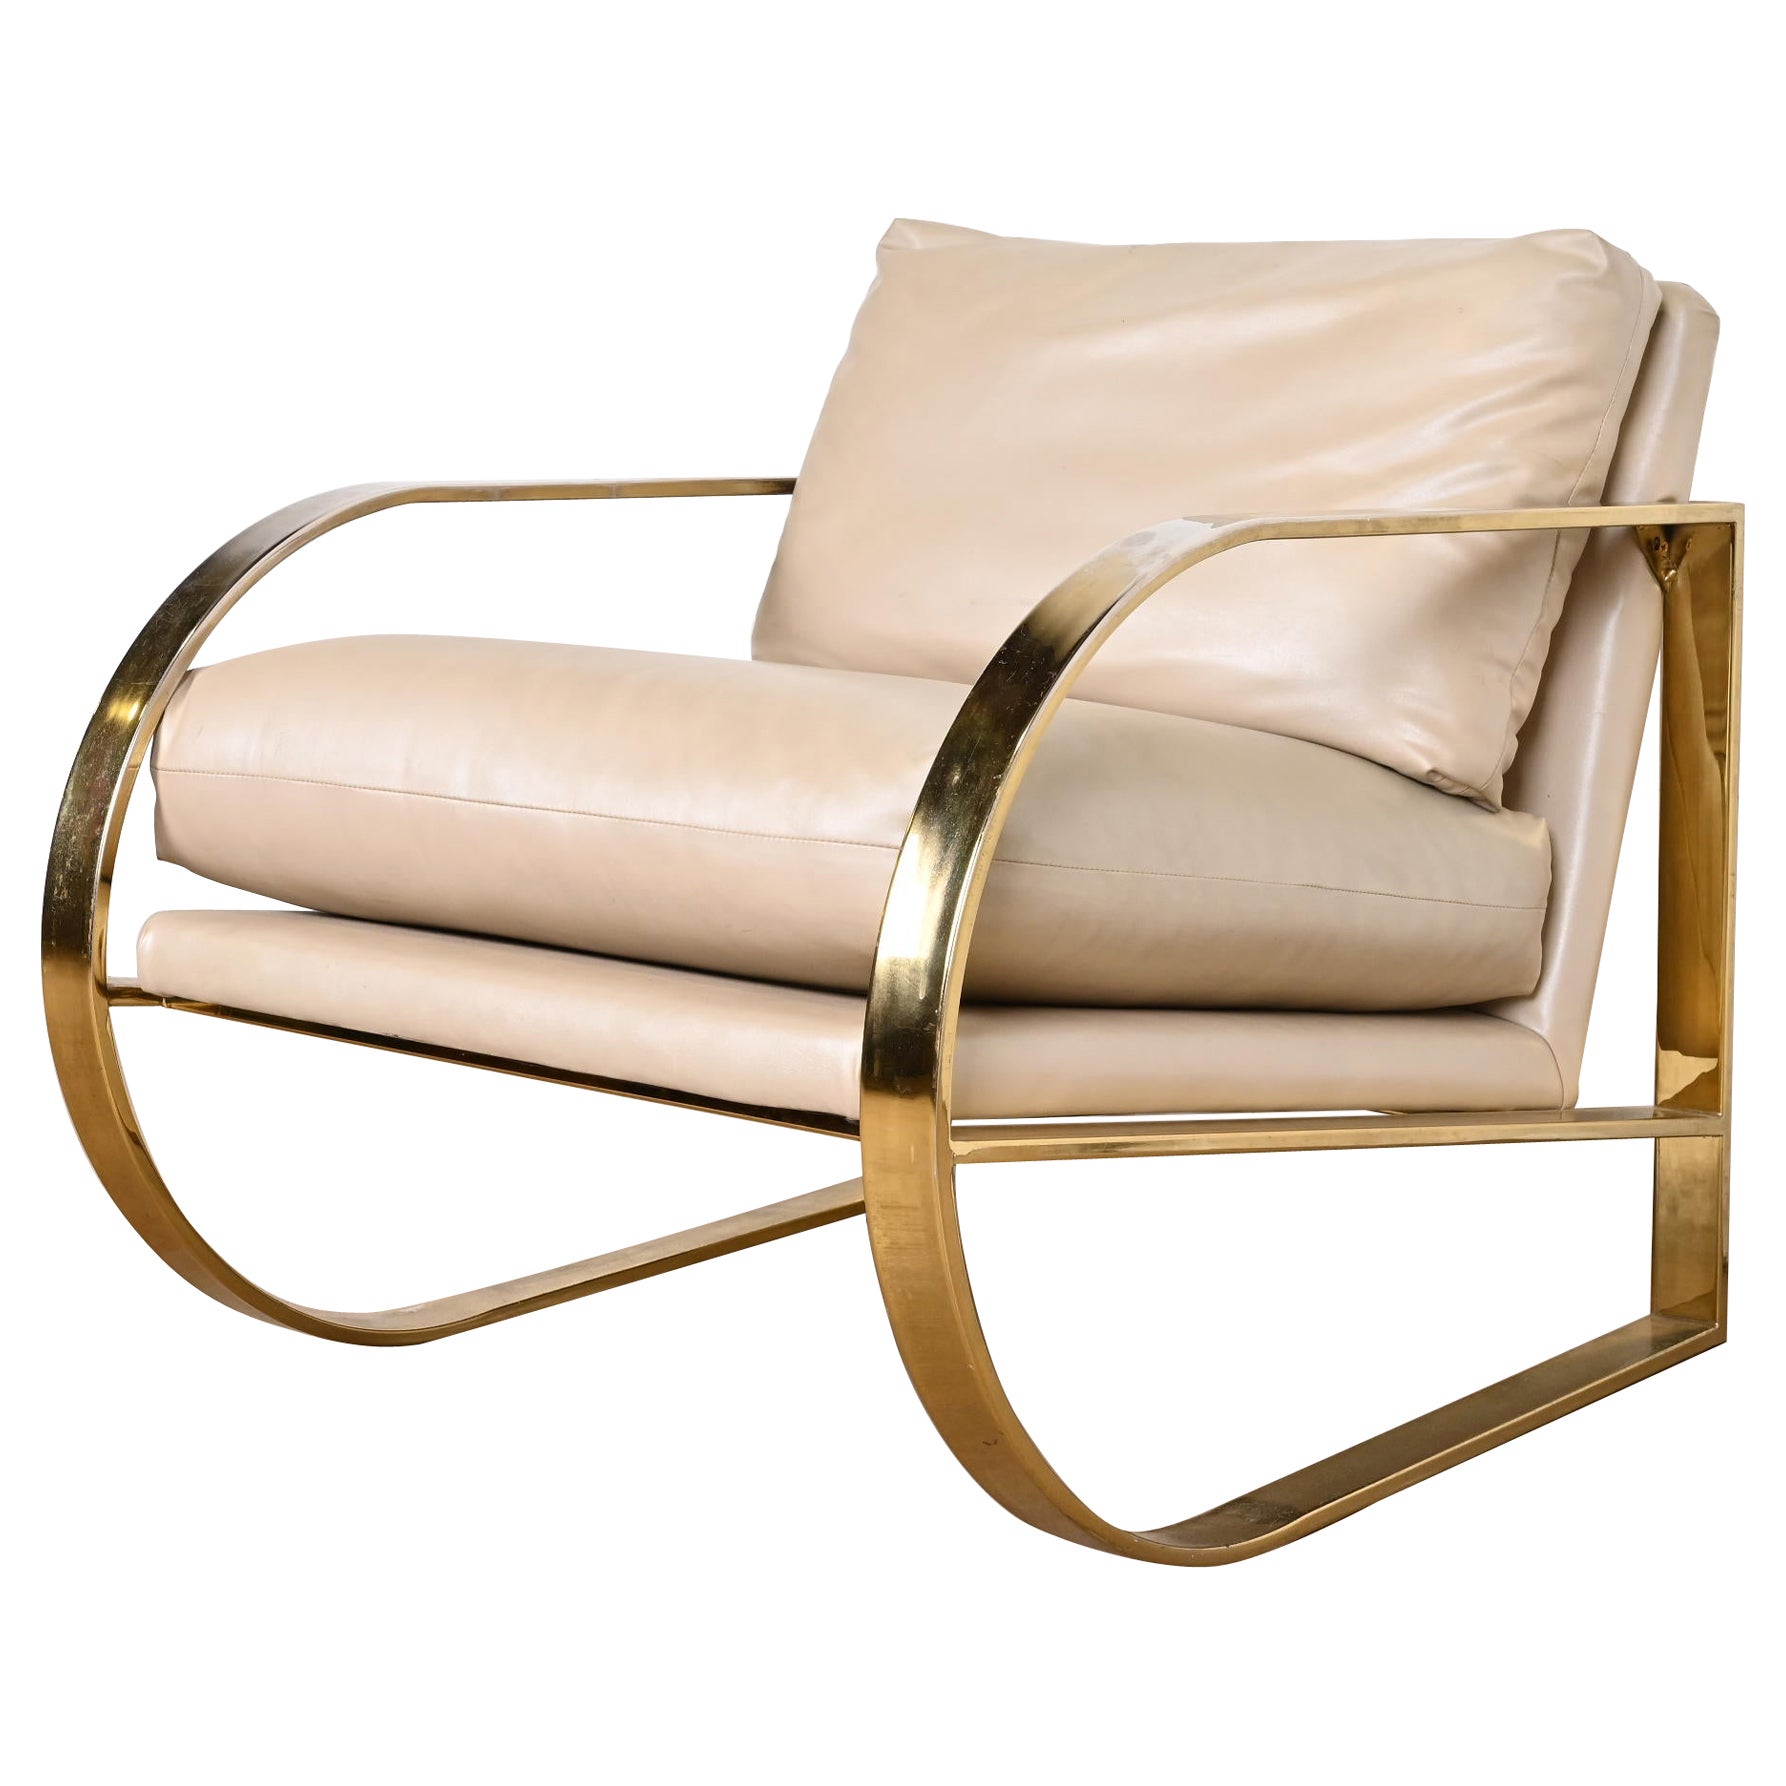 John Mascheroni for Swaim Originals Brass and Leather Lounge Chair For Sale